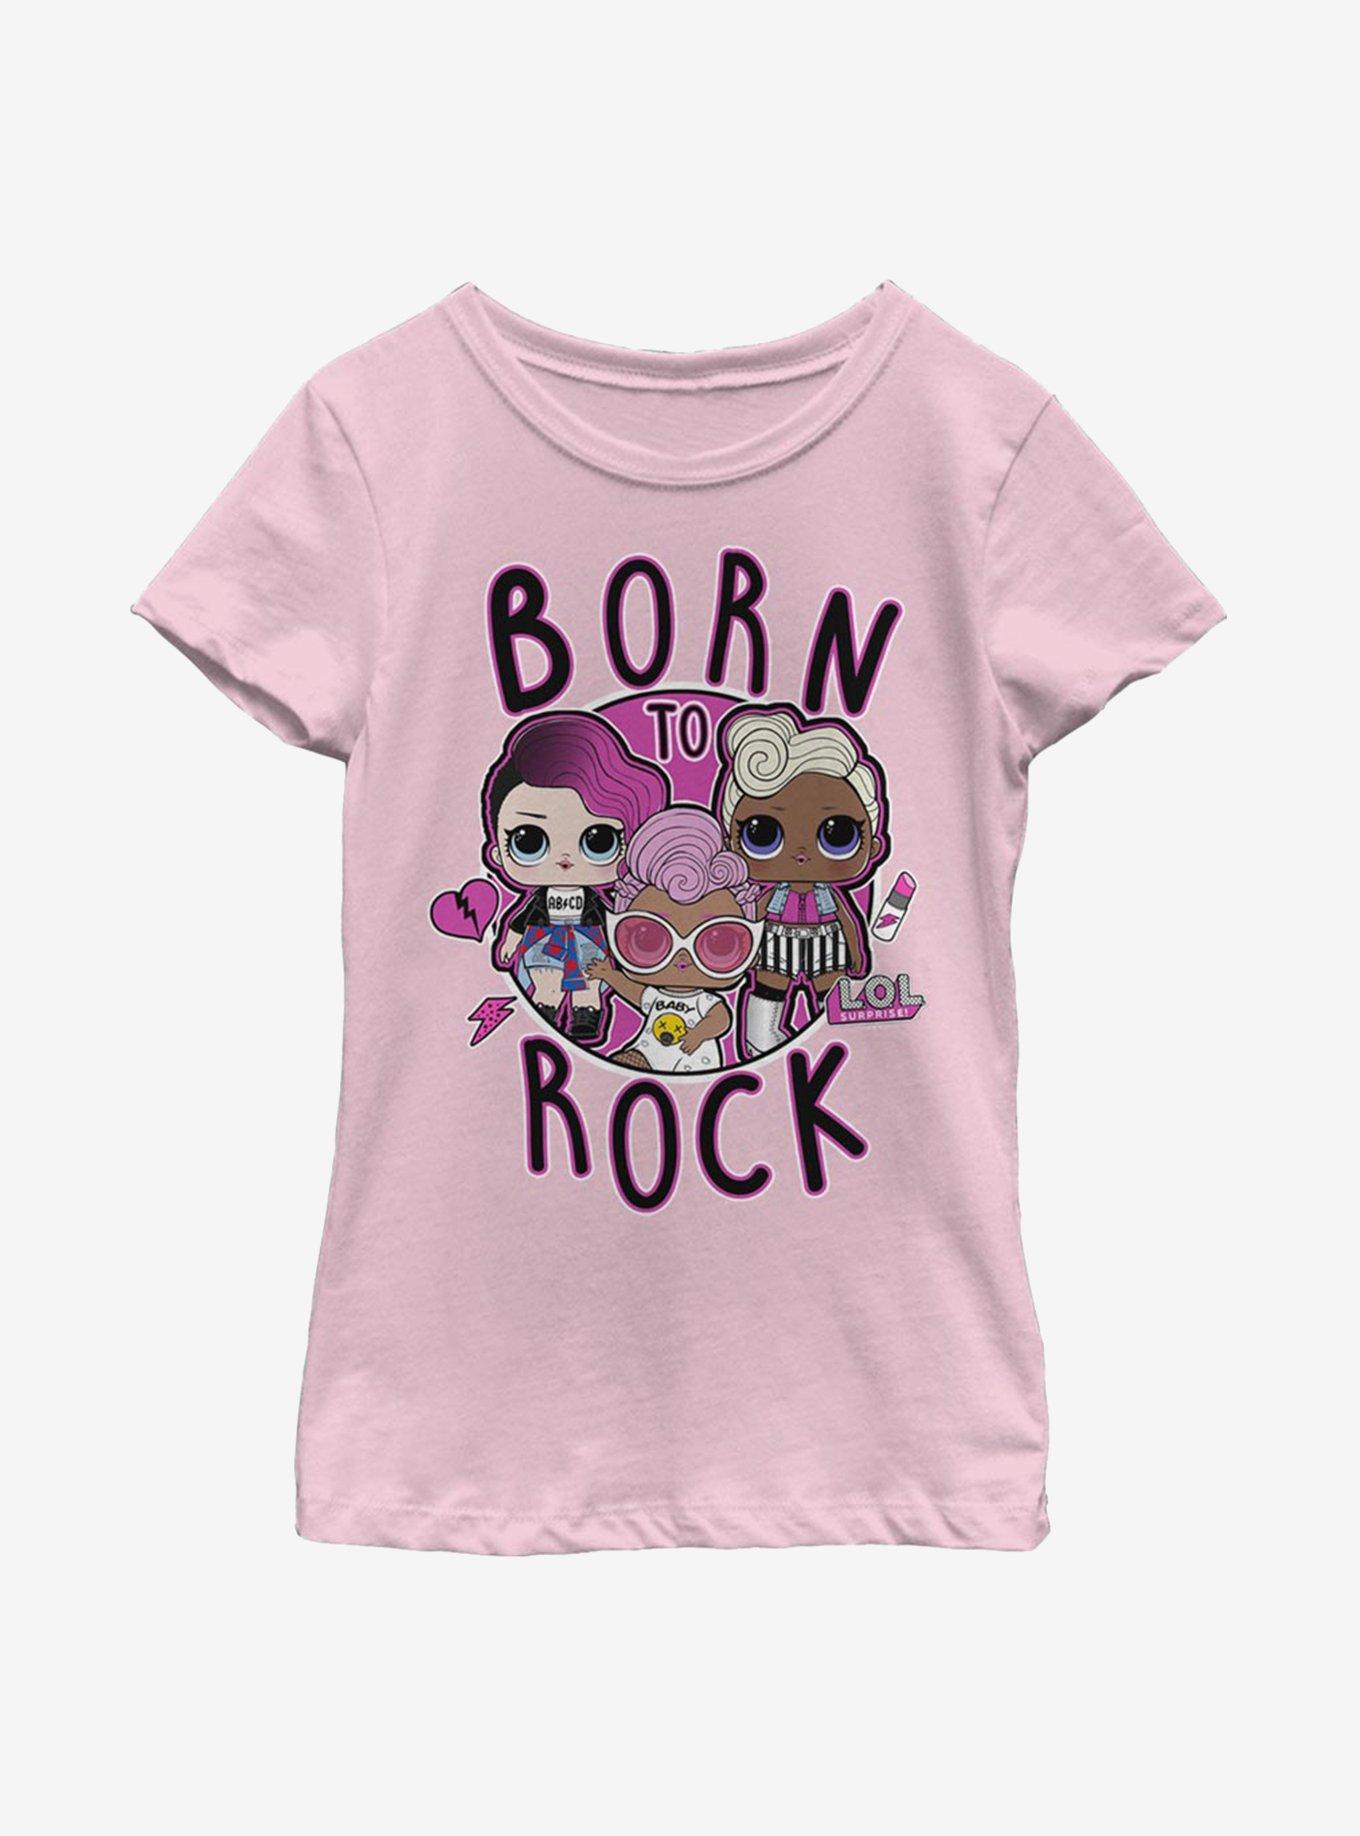 L.O.L. Surprise! Born To Rock Youth Girls T-Shirt, PINK, hi-res